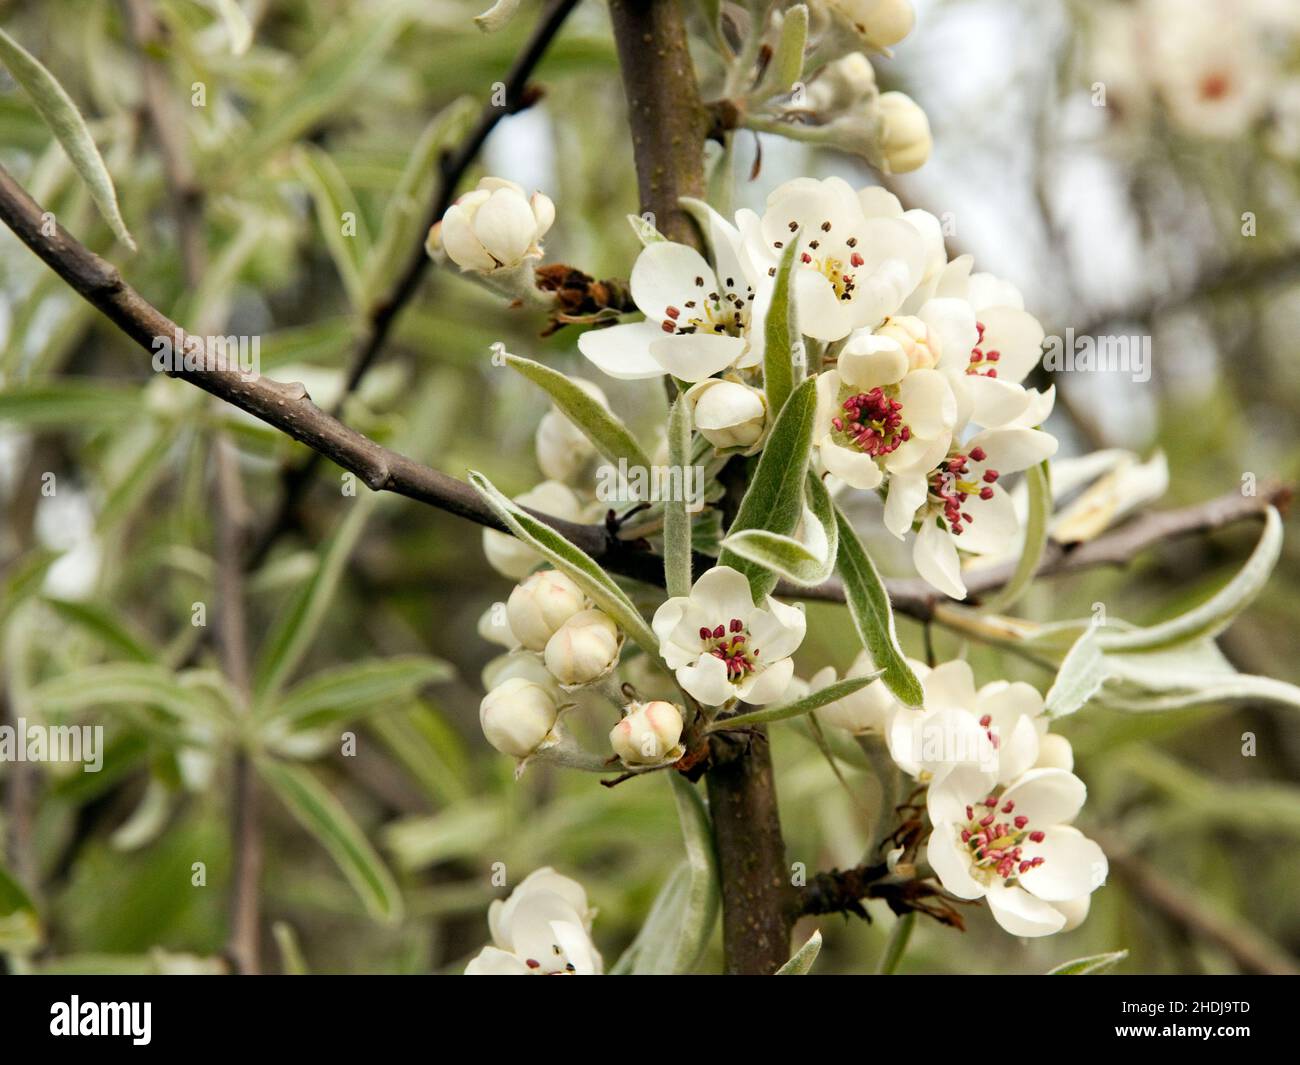 pear blossom, pyrus salicifolia, pear blossoms, weeping pear, willow-leaved pear Stock Photo